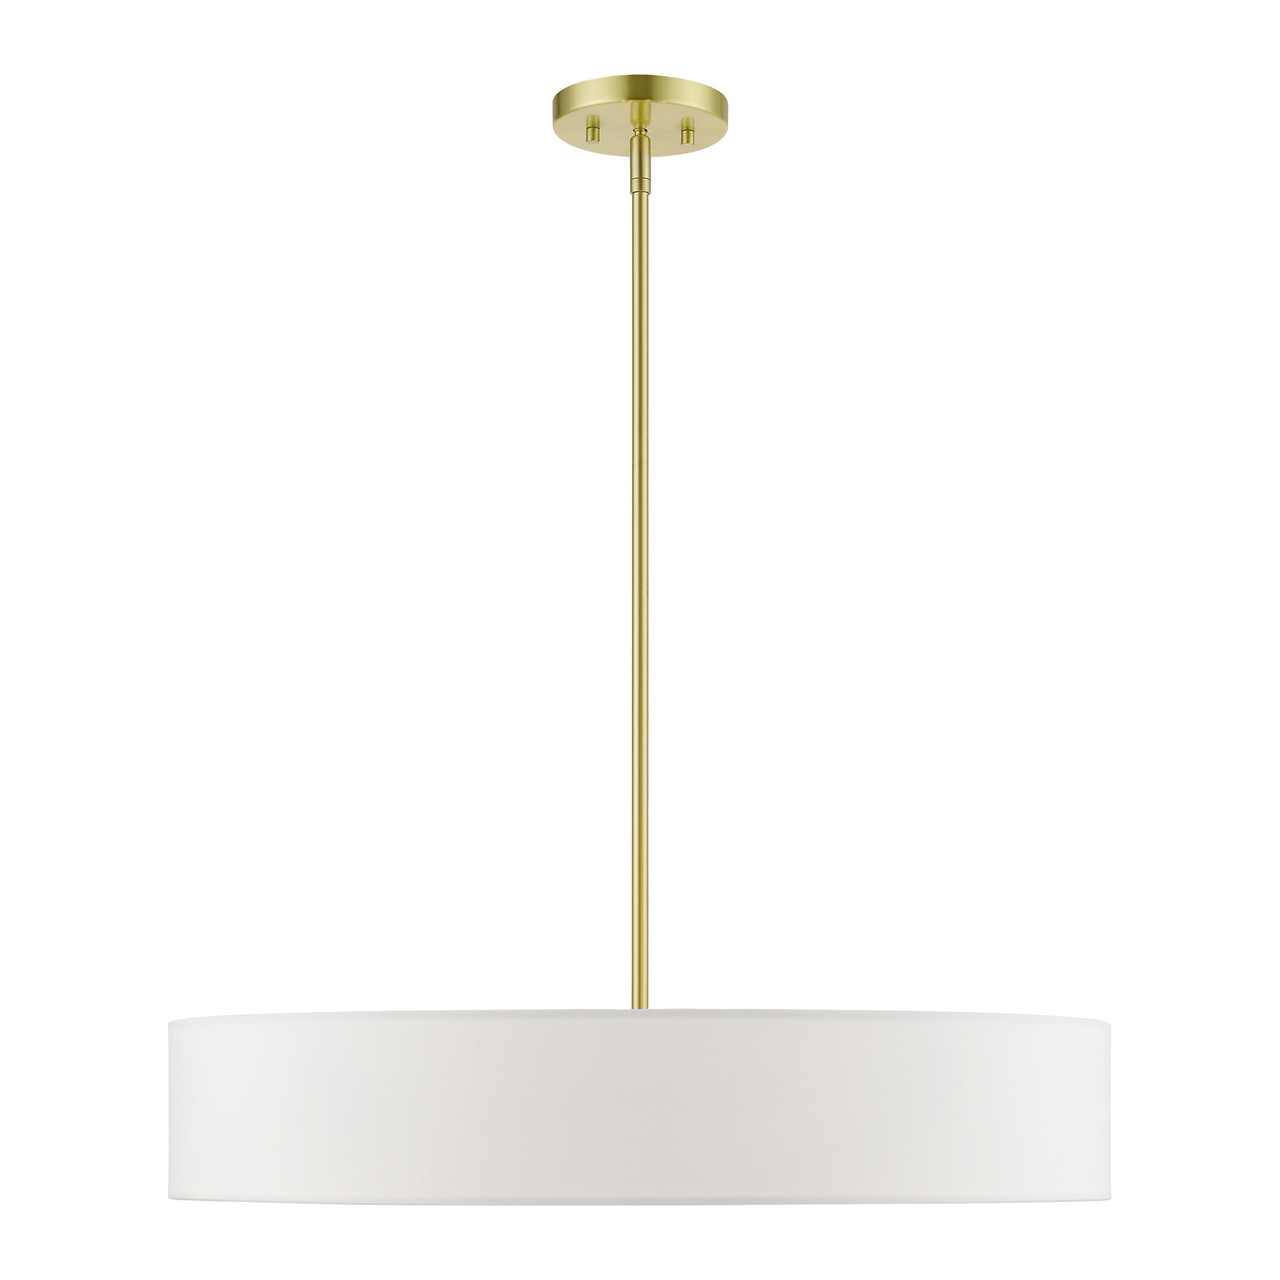 LIVEX LIGHTING 46925-12 5 Light Satin Brass with Shiny White Accents Large Drum Pendant